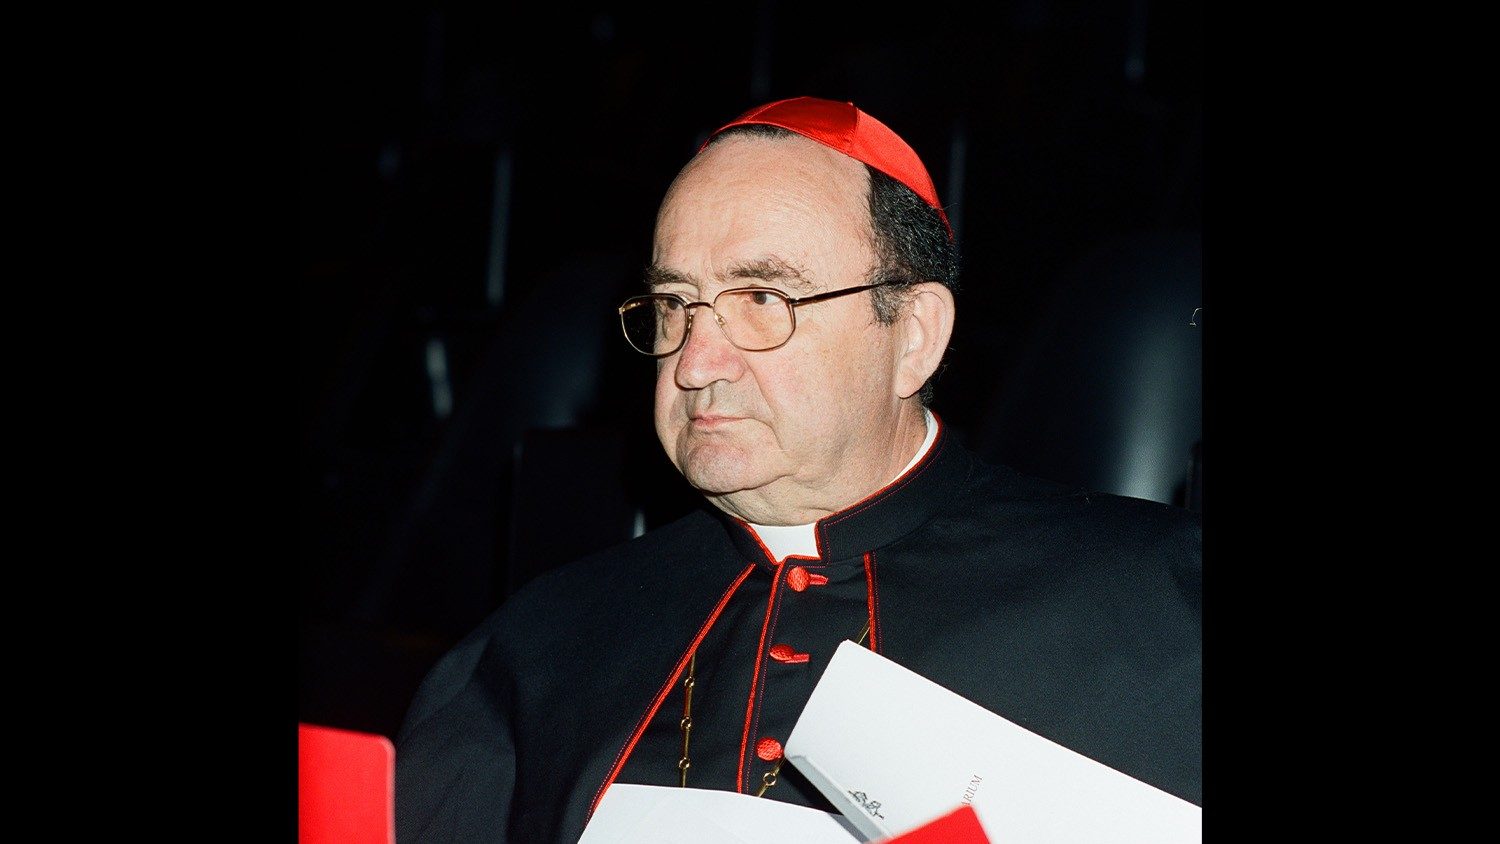 Pope Francis sends condolences on the death of Cardinal Schwery